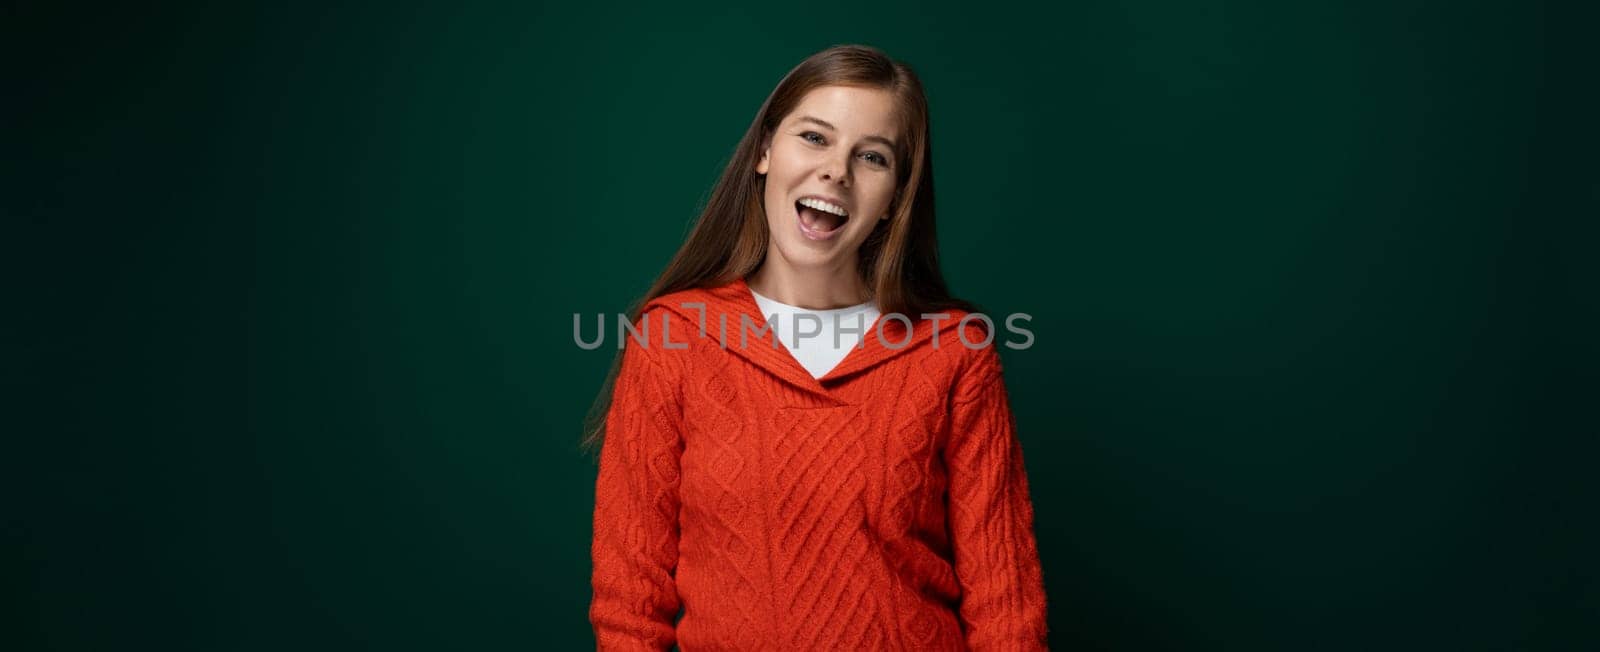 Well-groomed 30 year old woman with brown hair wears a red knitted sweater on a green background by TRMK